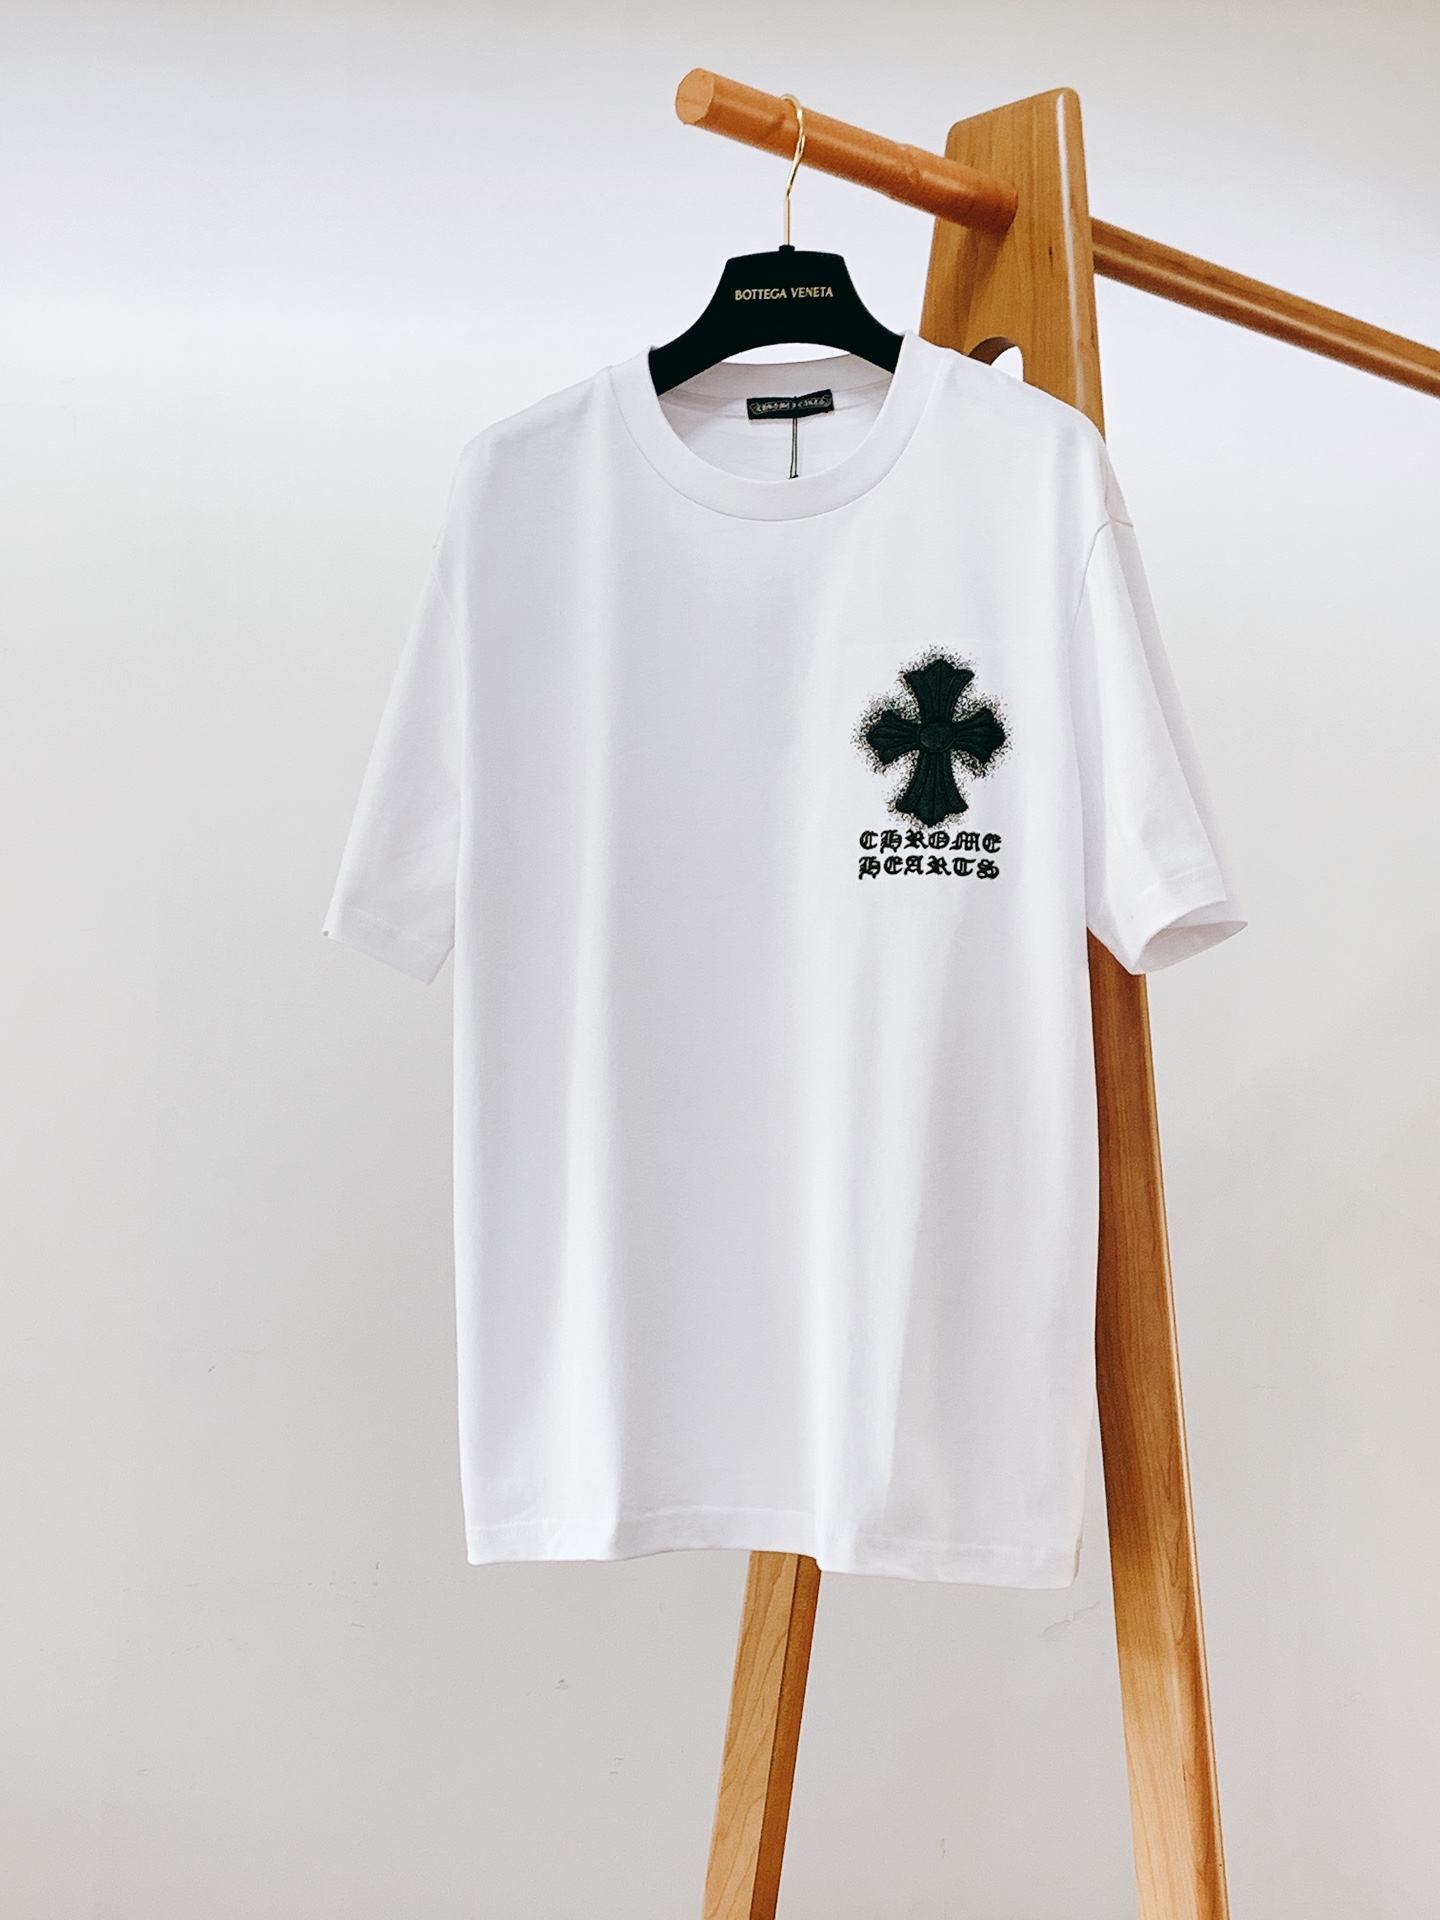 Chrome Hearts Clothing T-Shirt Embroidery Unisex Cotton Spring/Summer Collection Fashion